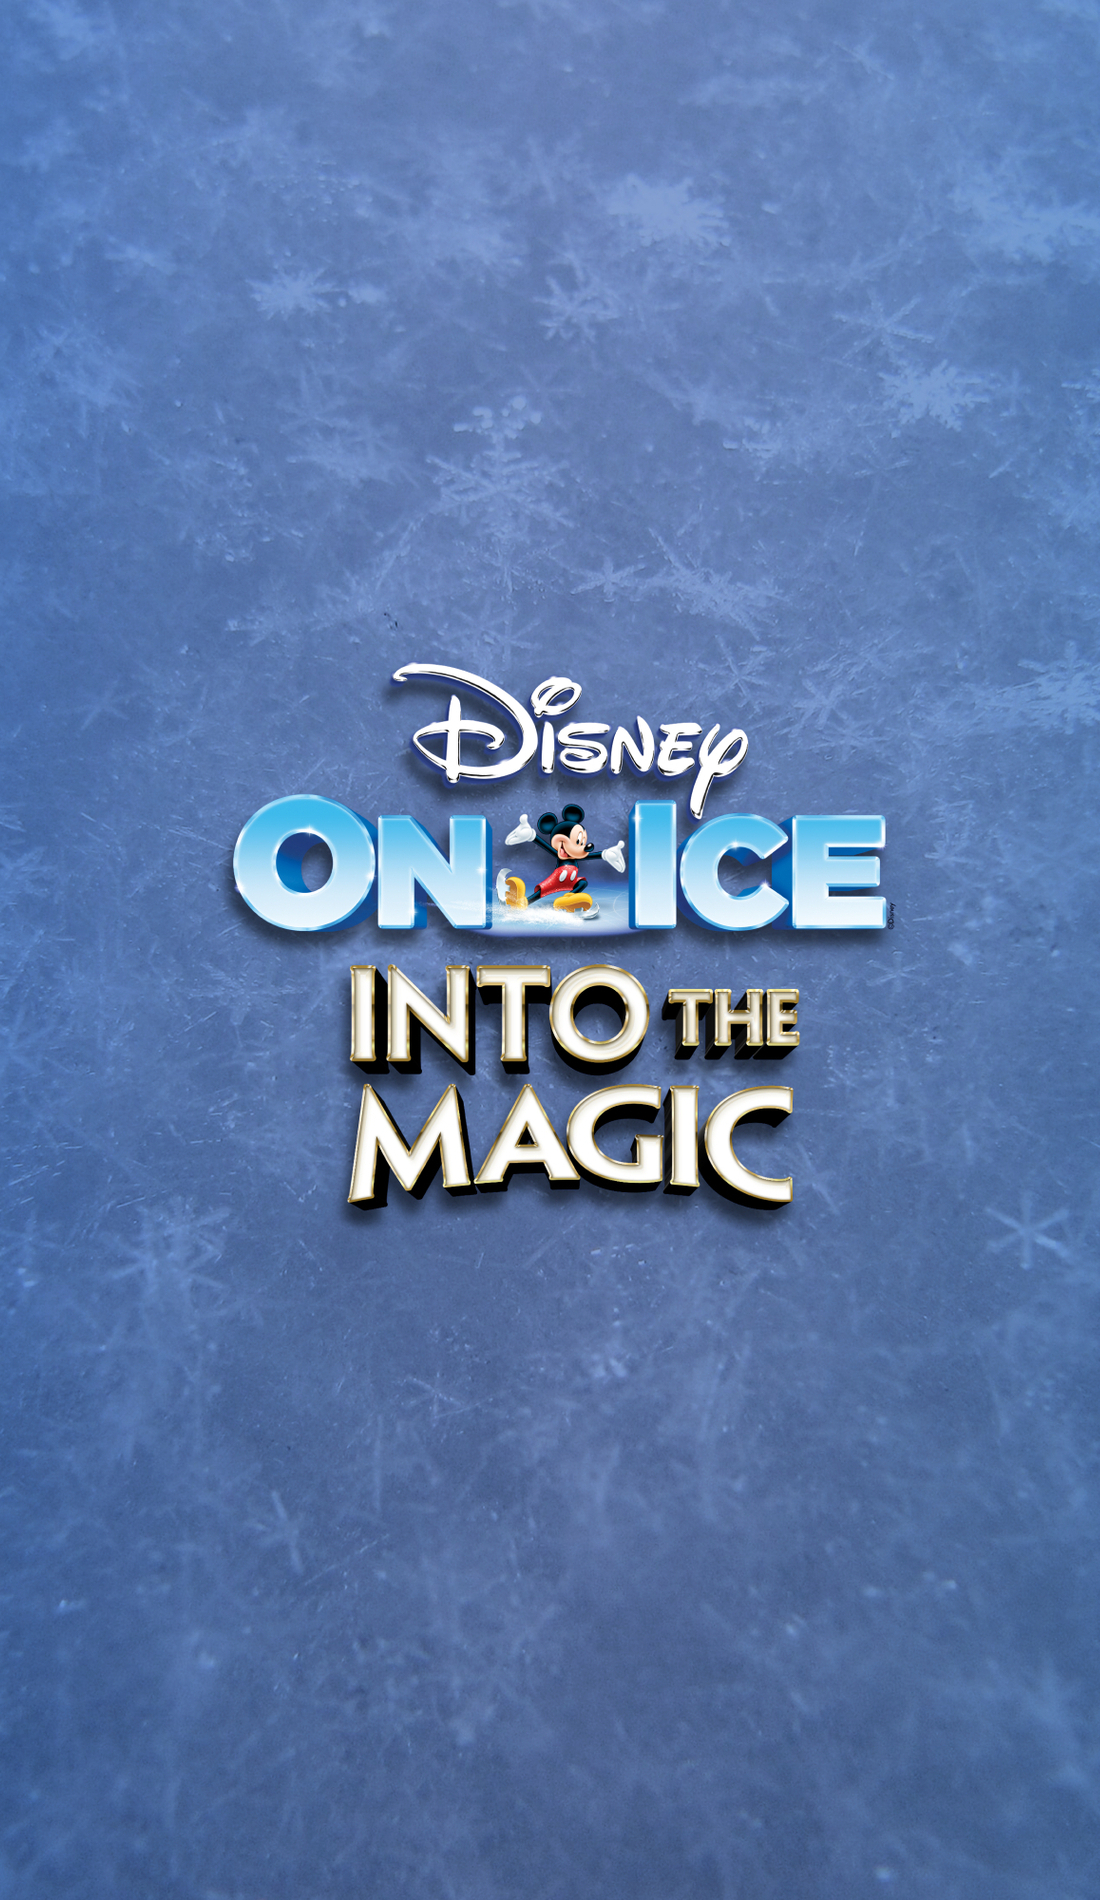 A Disney On Ice: Into the Magic live event